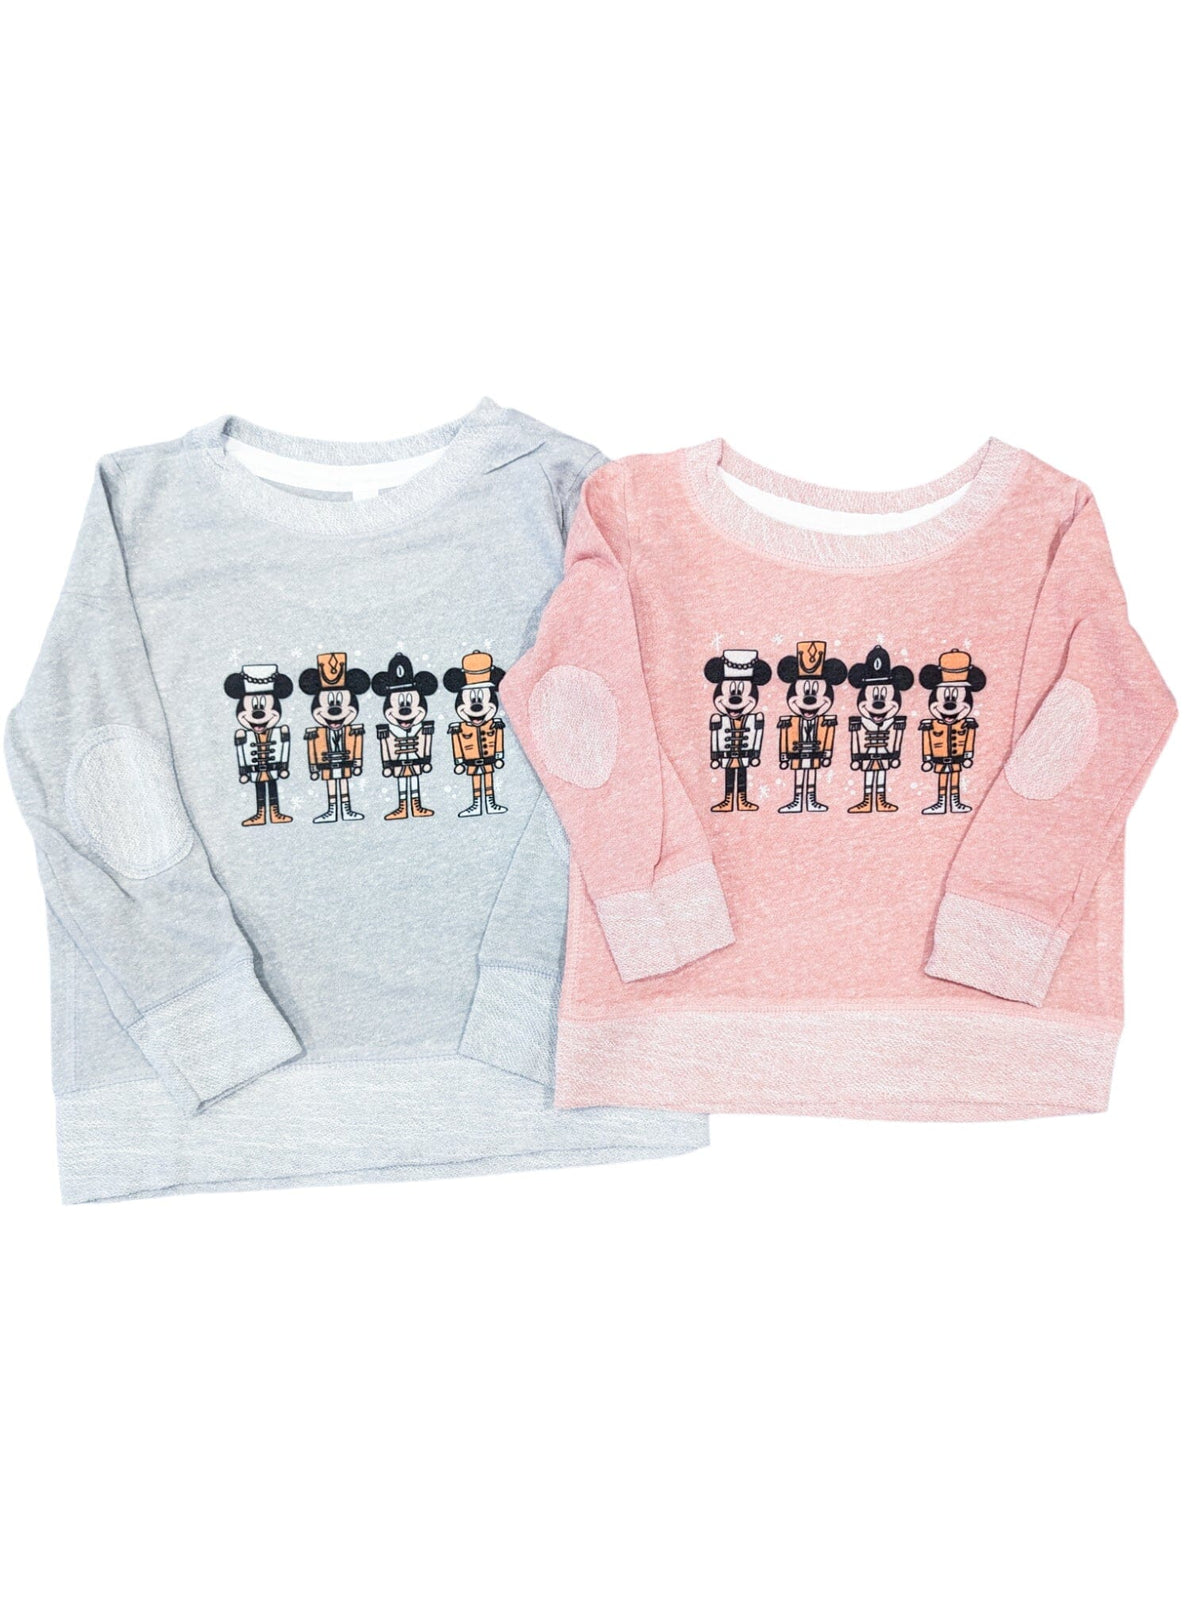 IMPERFECTION Nutcracker Mickey Pullover 2T